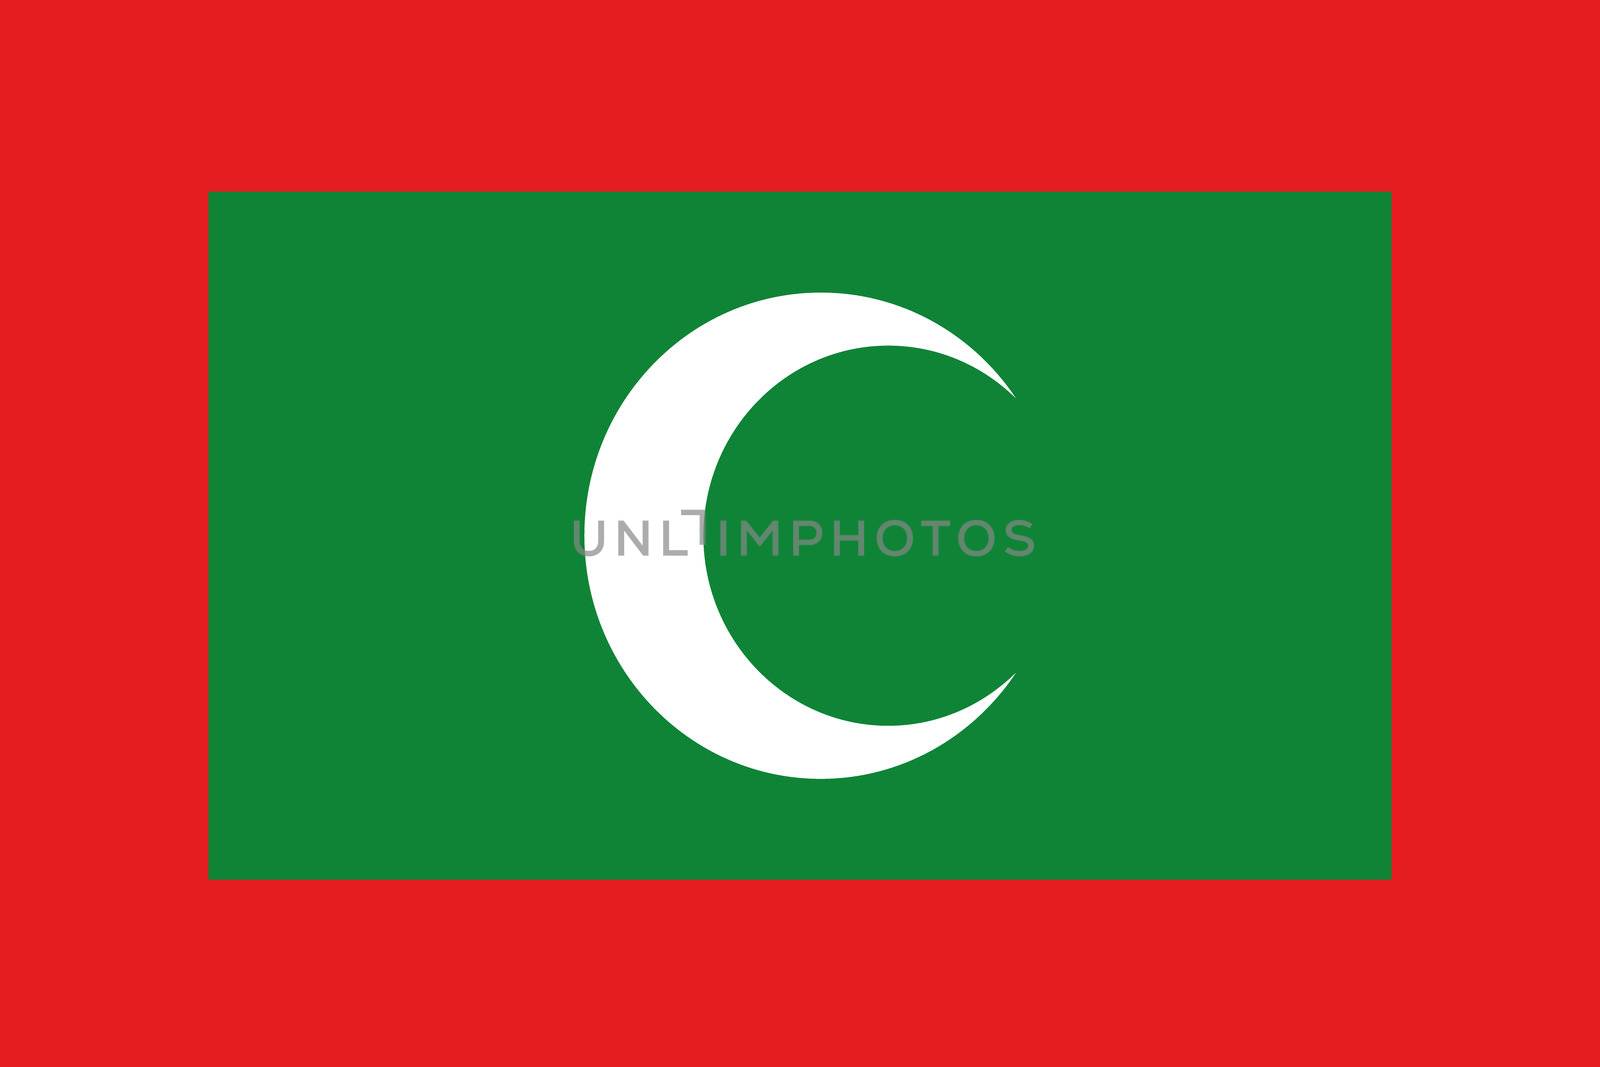 An illustration of the flag of Maldives